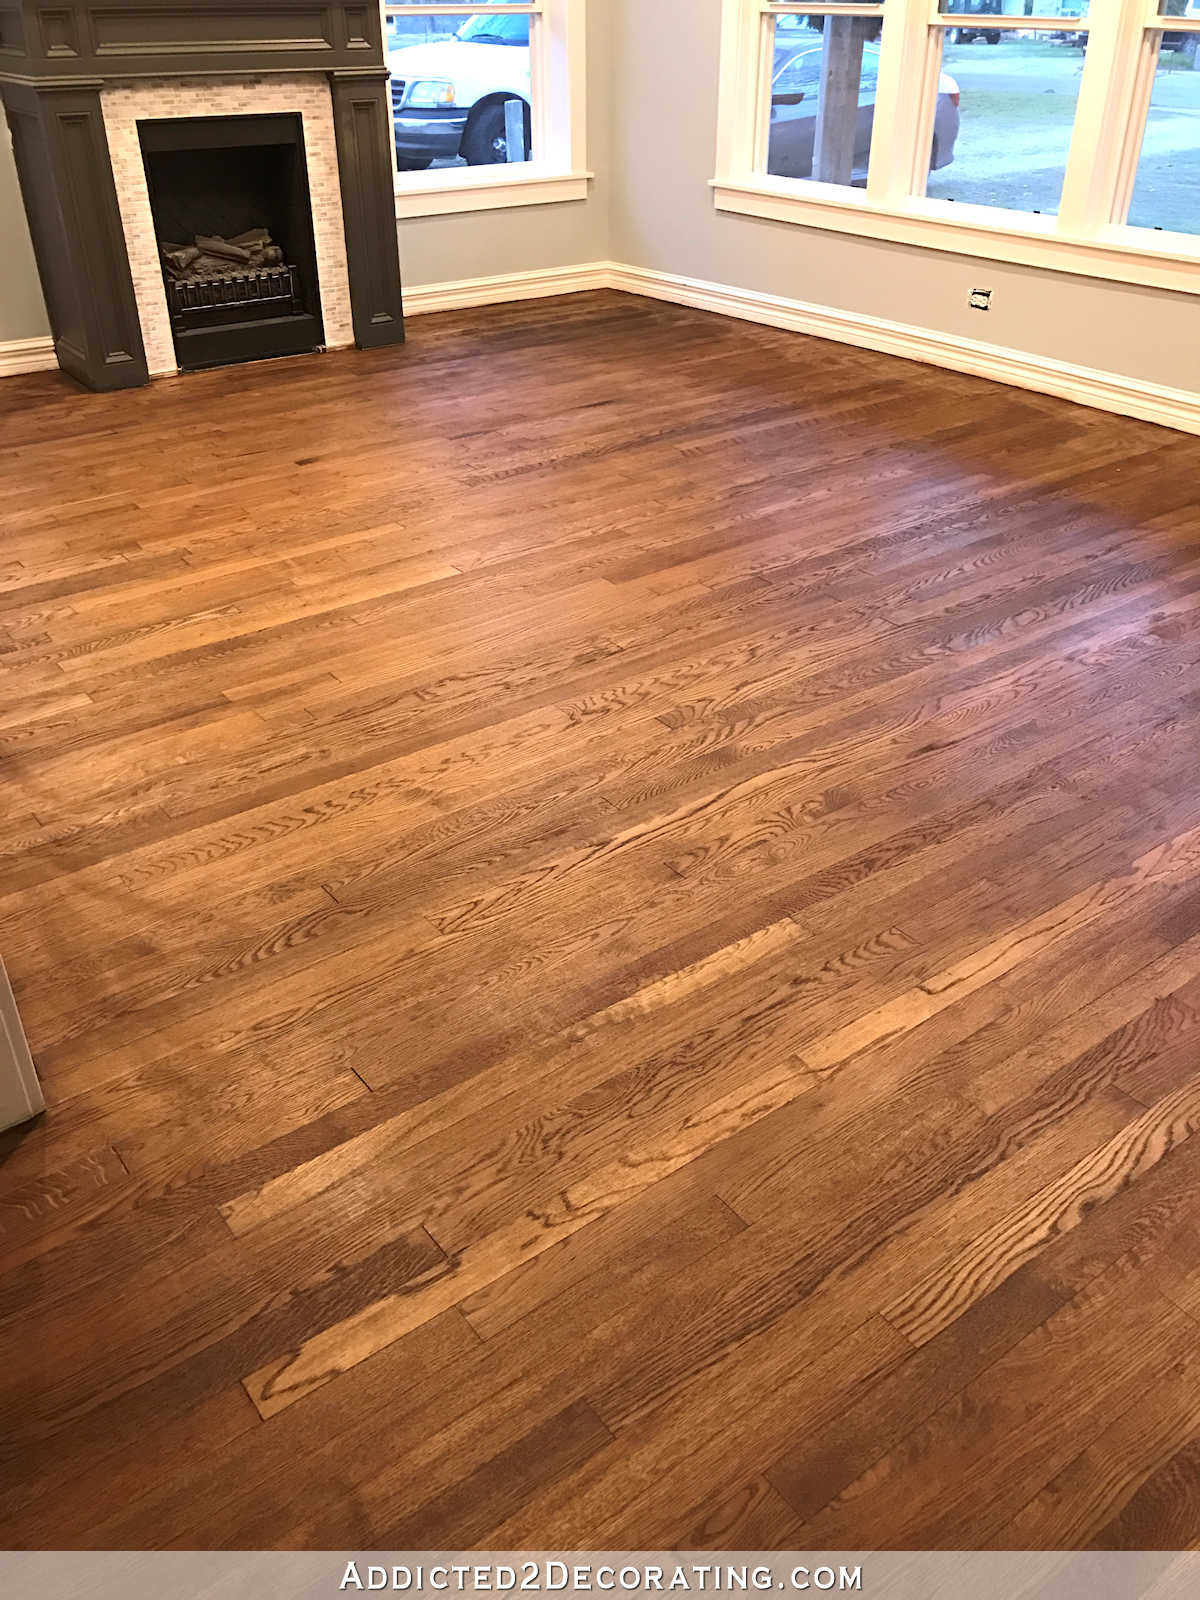 27 attractive How Difficult is It to Refinish Hardwood Floors 2024 free download how difficult is it to refinish hardwood floors of adventures in staining my red oak hardwood floors products process with regard to staining red oak hardwood floors 8a living room and entry